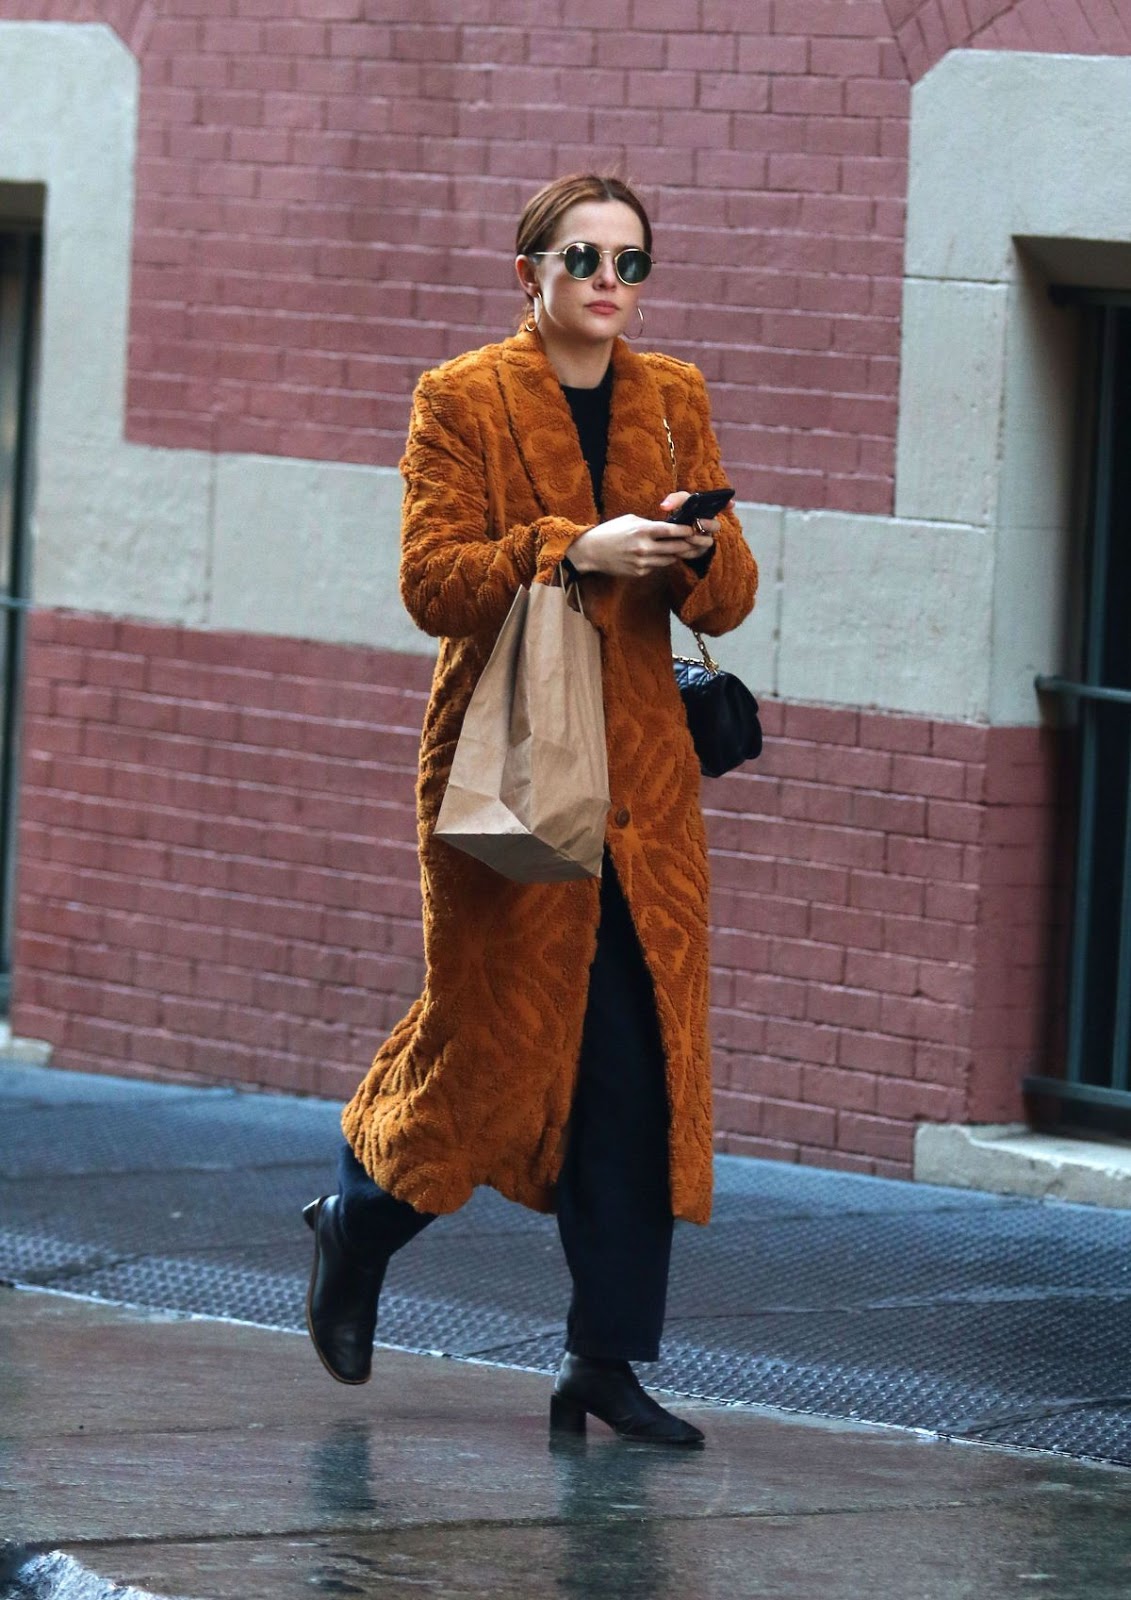 Zoey Deutch Clicked Outside While Shopping in New York 16 Jan-2020